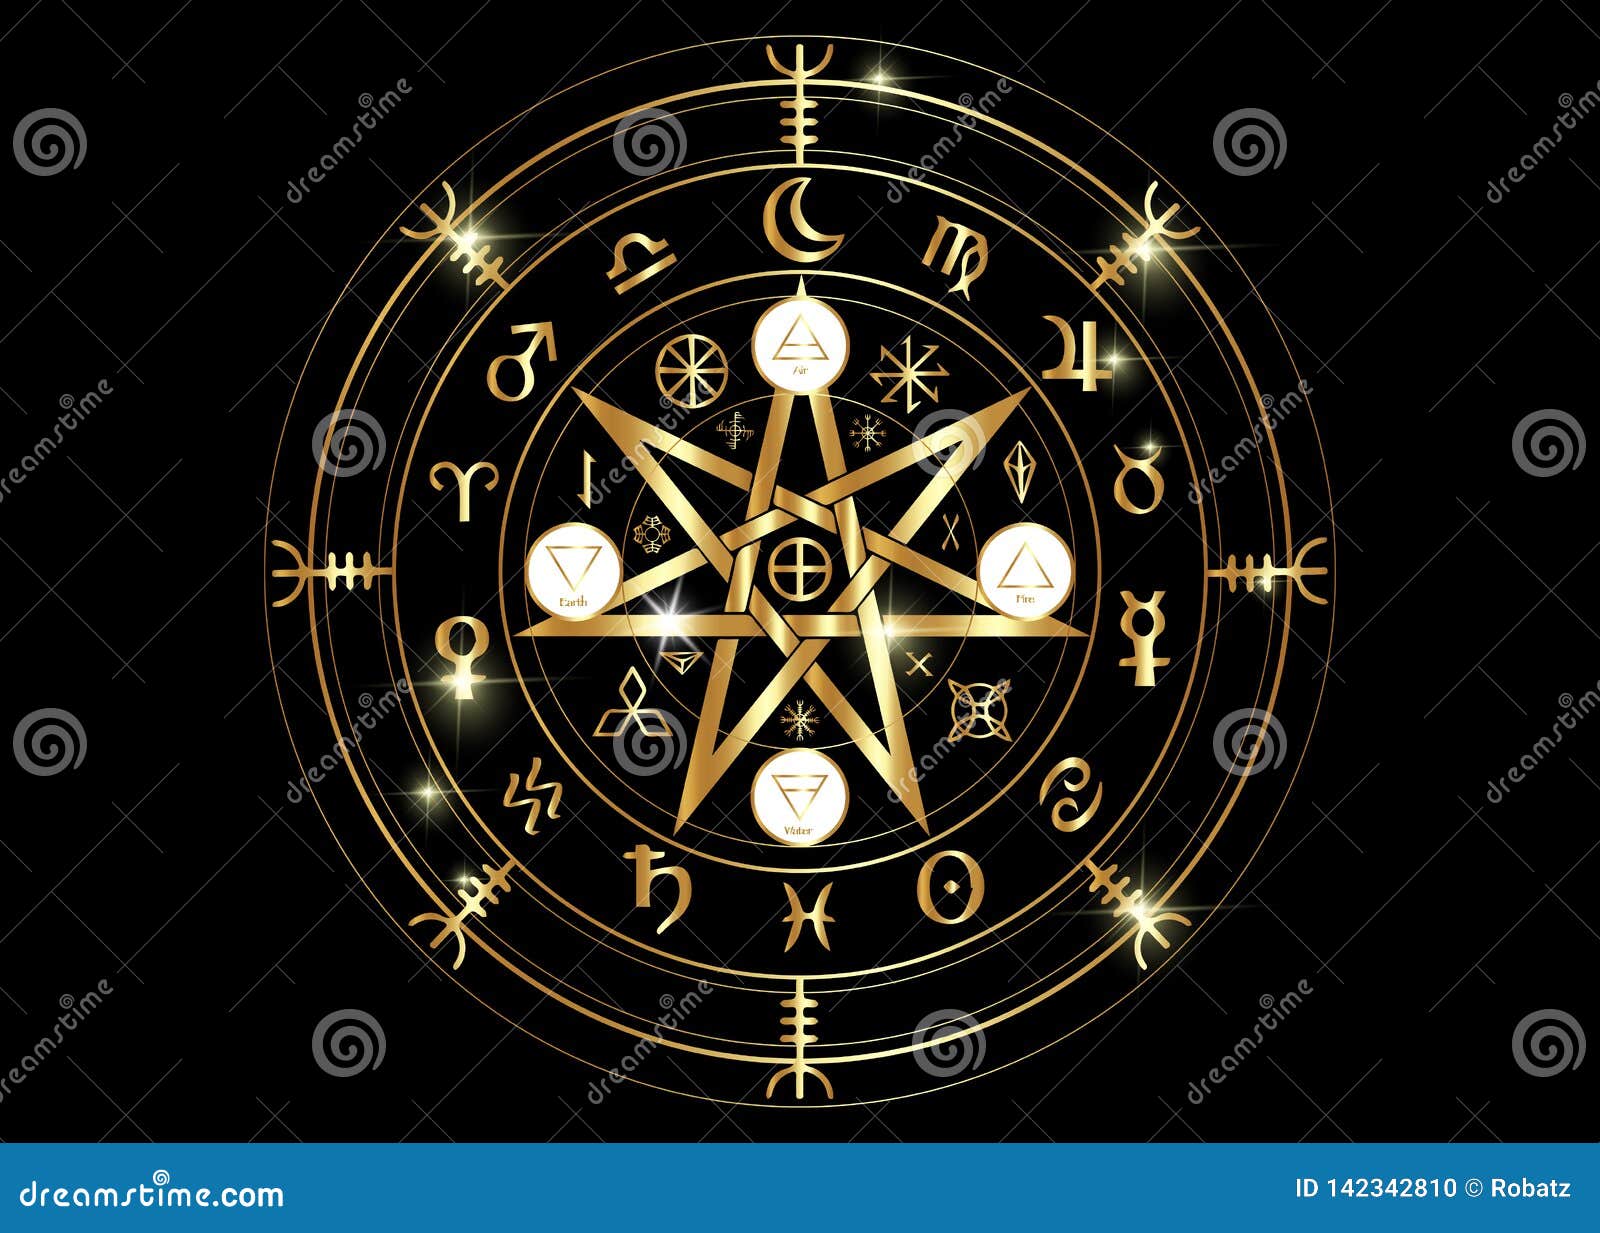 wiccan  of protection. gold mandala witches runes, mystic wicca divination. ancient occult s, earth zodiac wheel